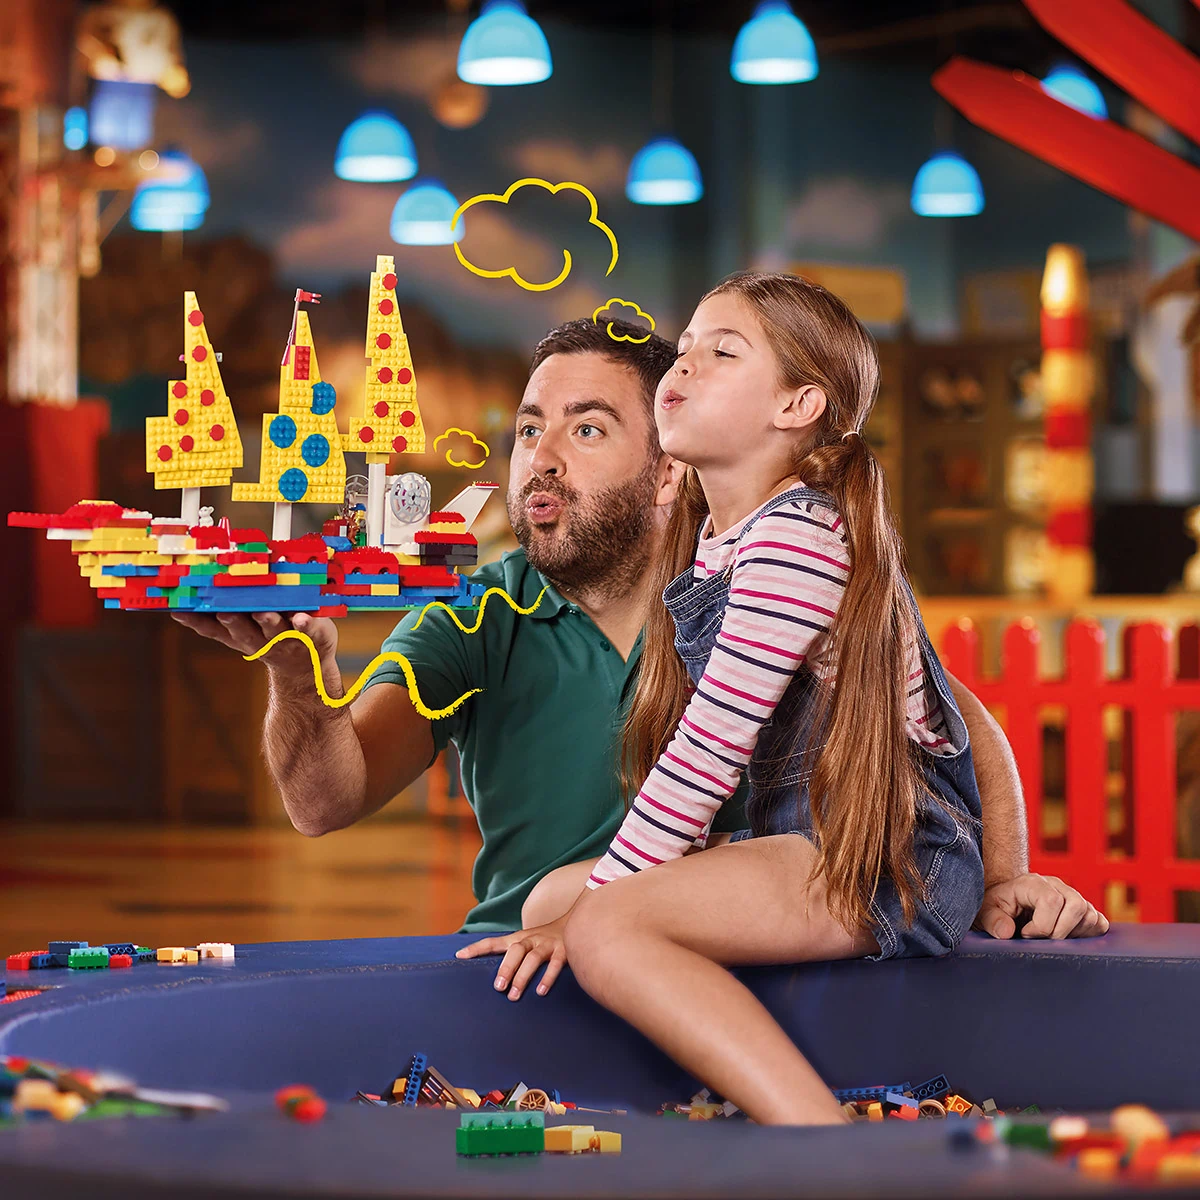 LEGOLAND® Discovery Centre Berlin, father and daughter play with Lego bricks and have created a colorful ship world